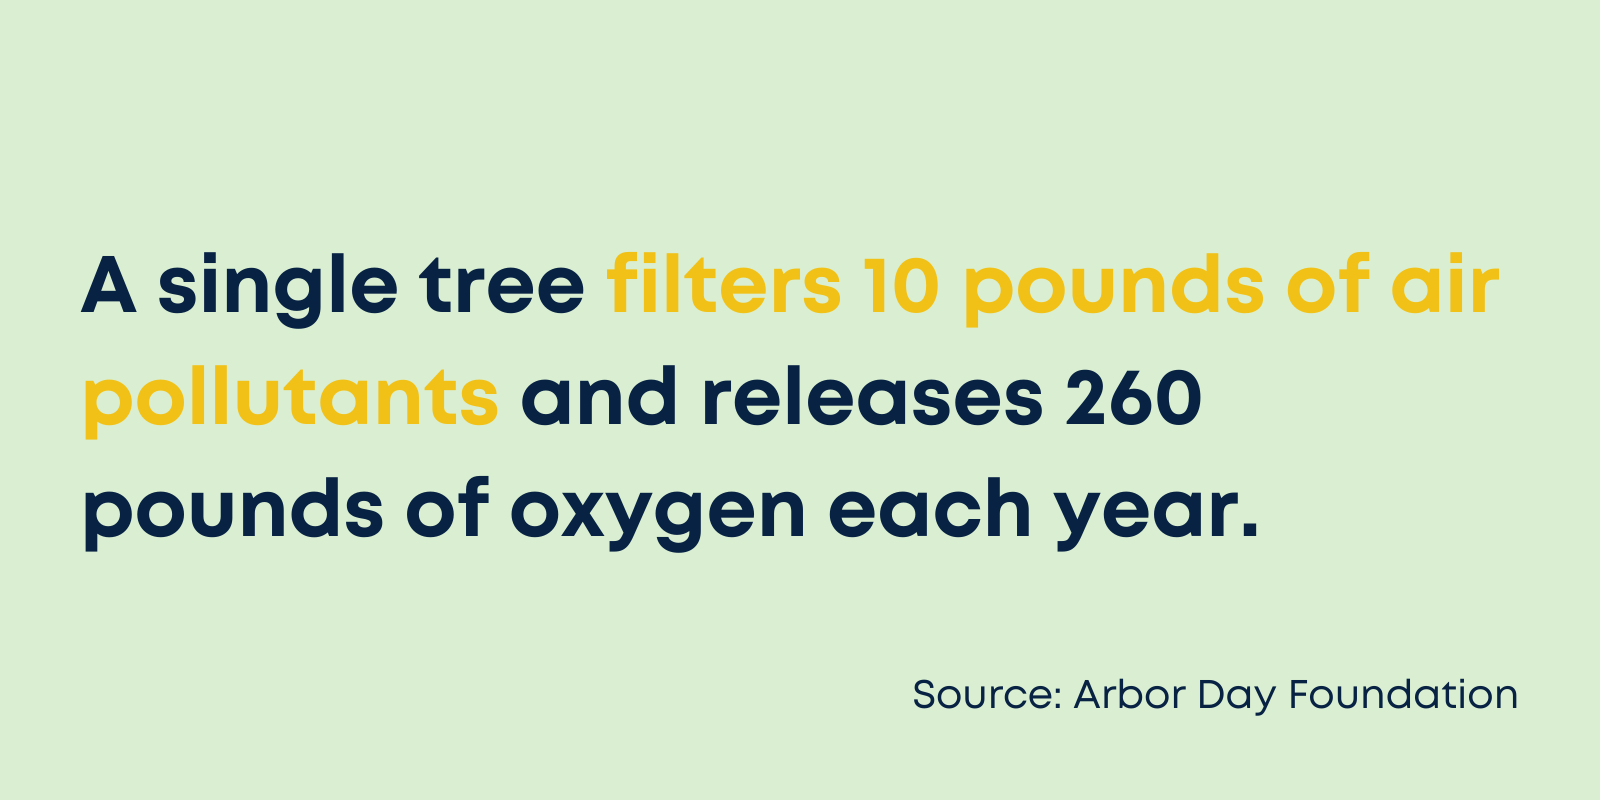 A single tree filters 10 pounds of air pollutants and releases 260 pounds of oxygen each year. 